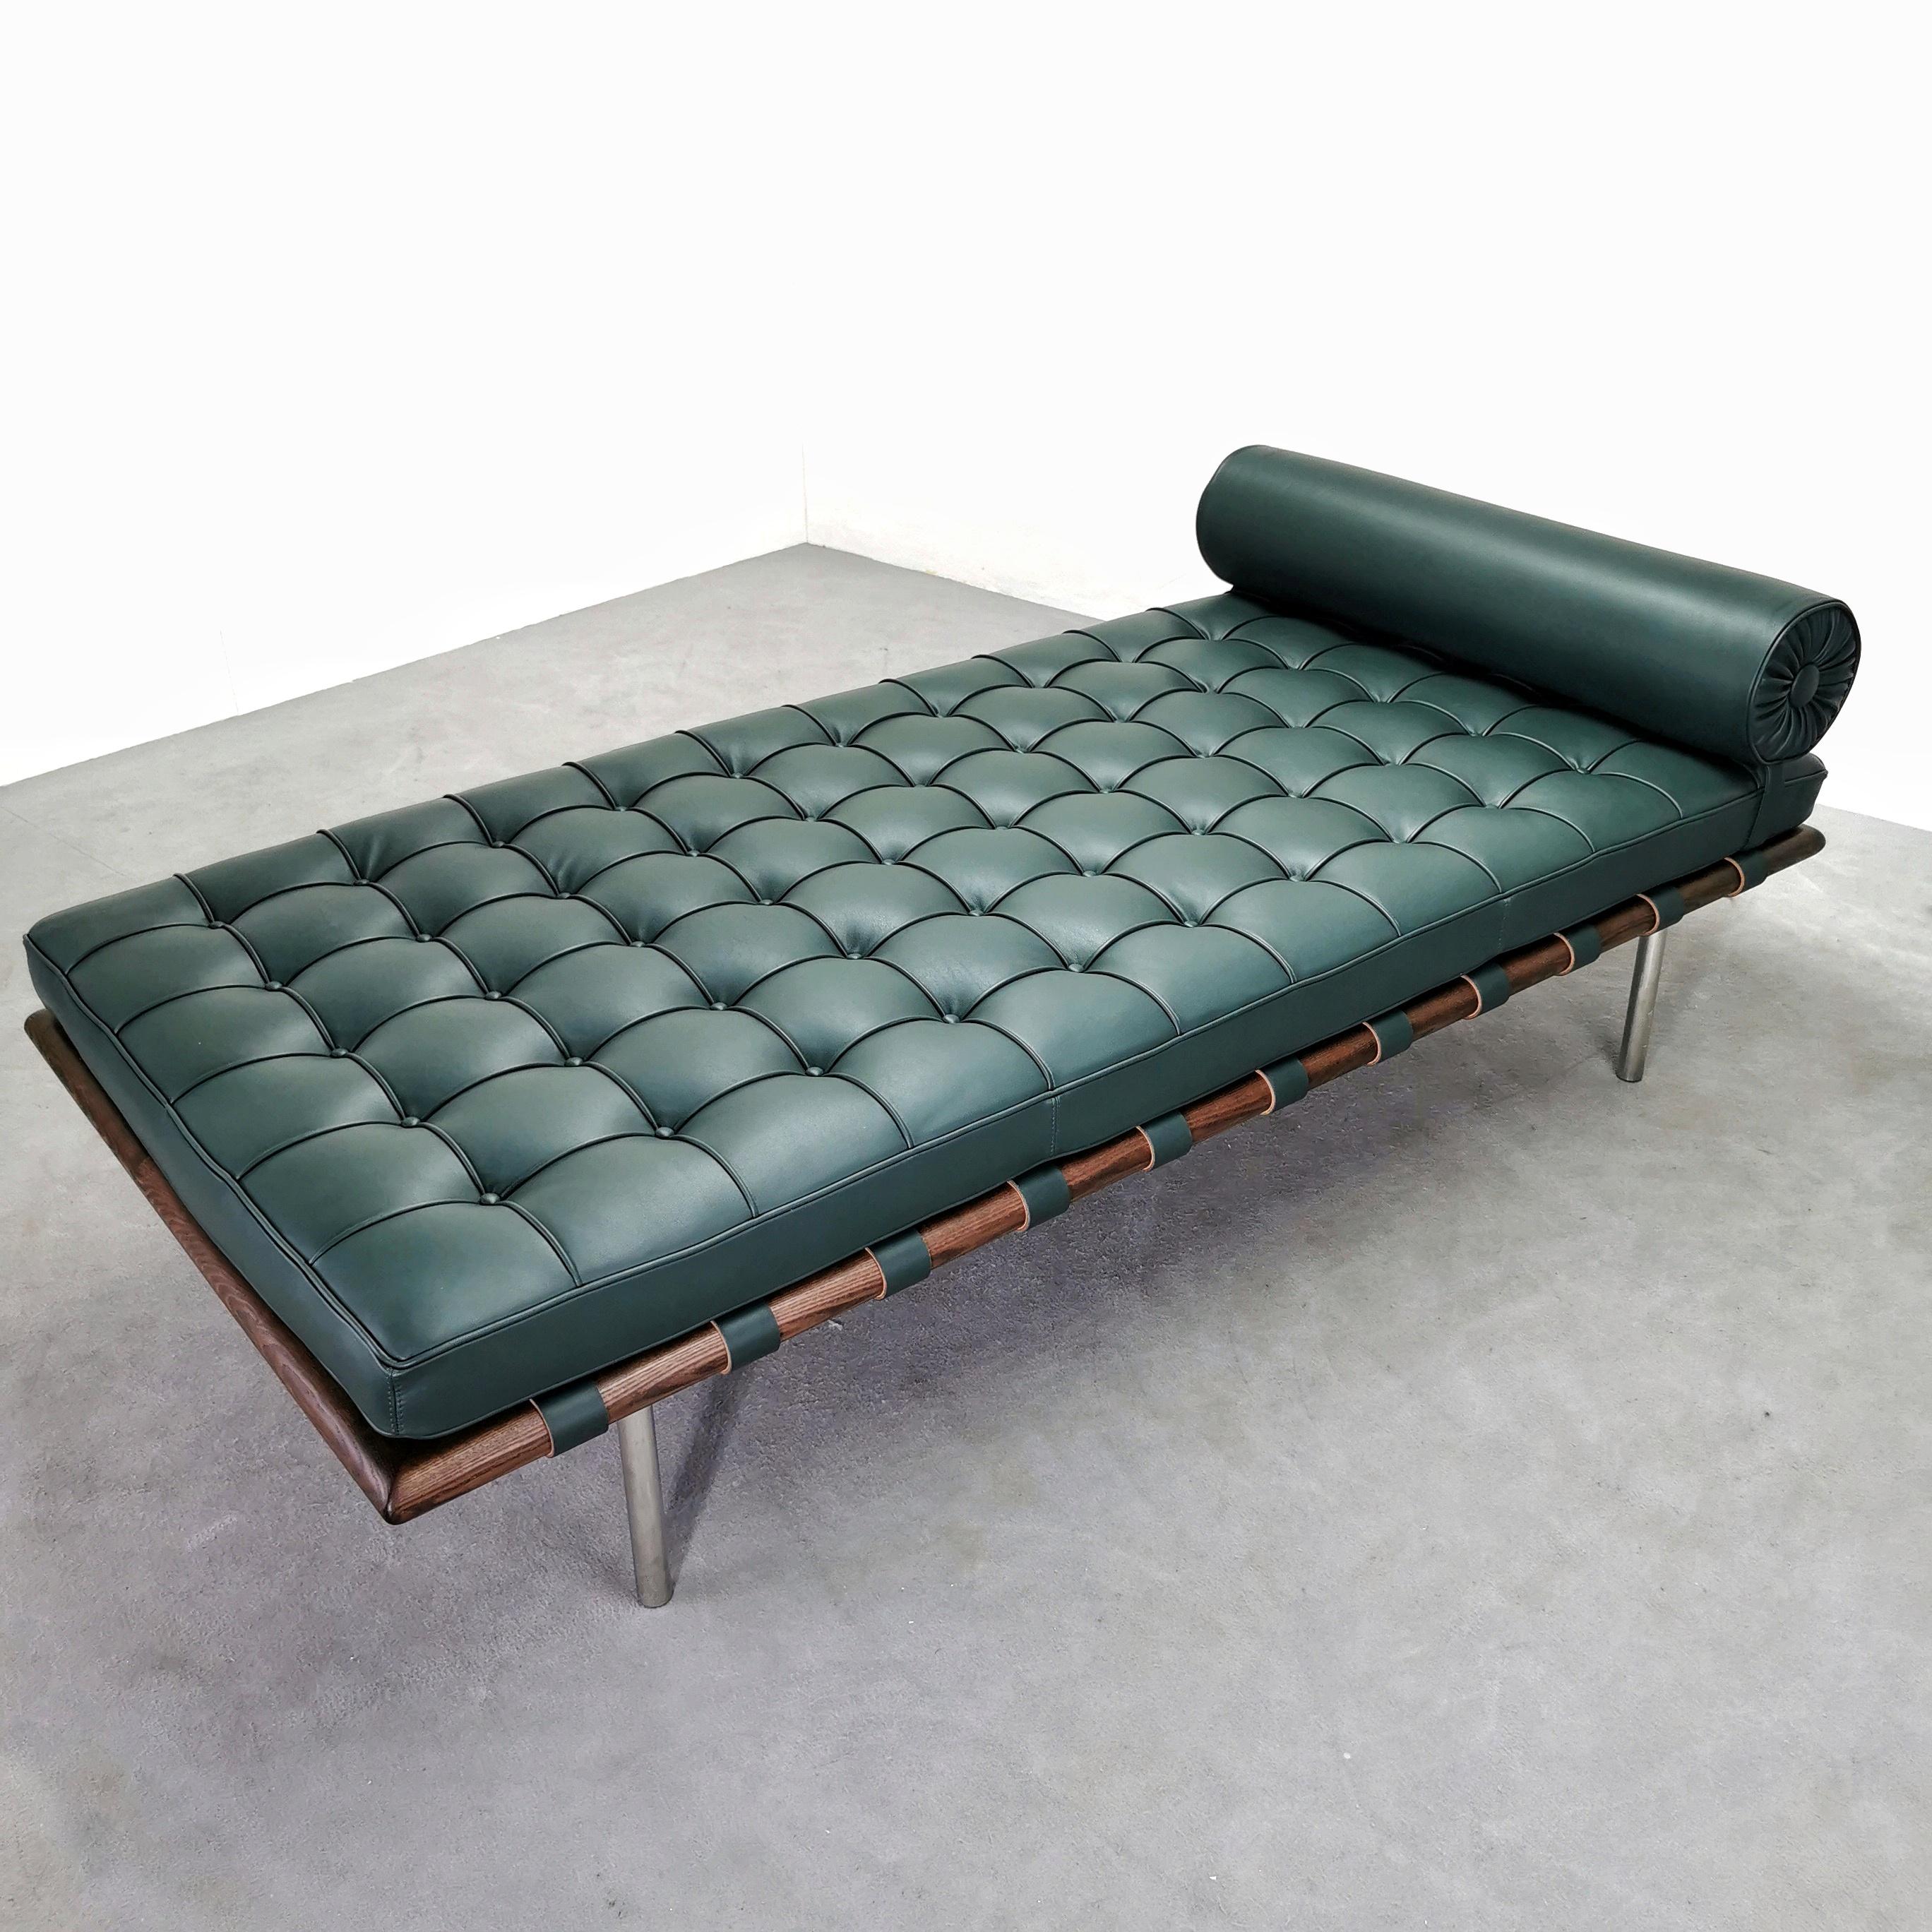 Lettino daybed  Knoll International Bercelona Van der Rohe pelle verde In Excellent Condition For Sale In Milano, MI